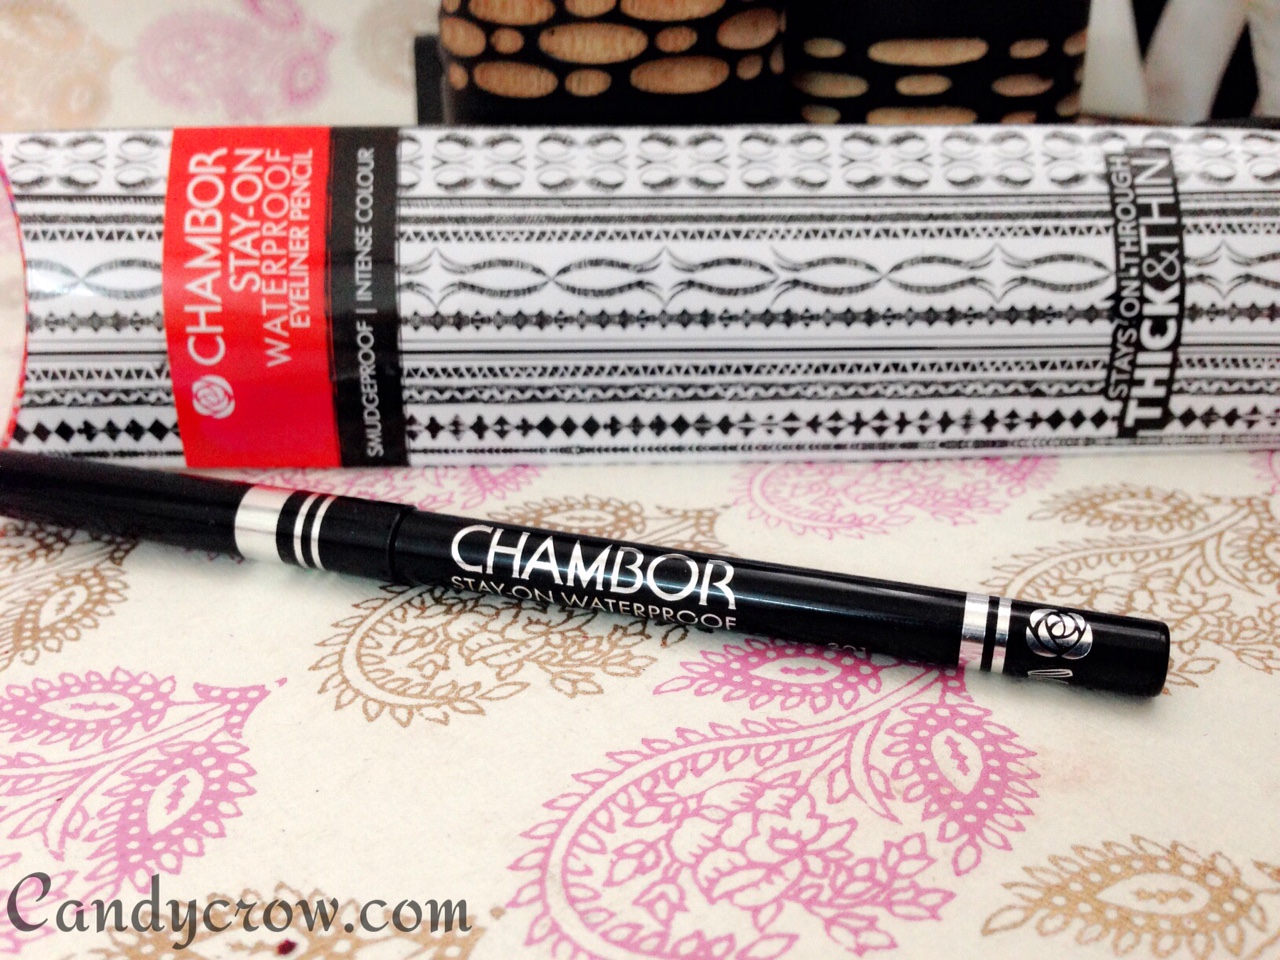 Chambor Stay-on Waterproof Eyeliner Pencil Review